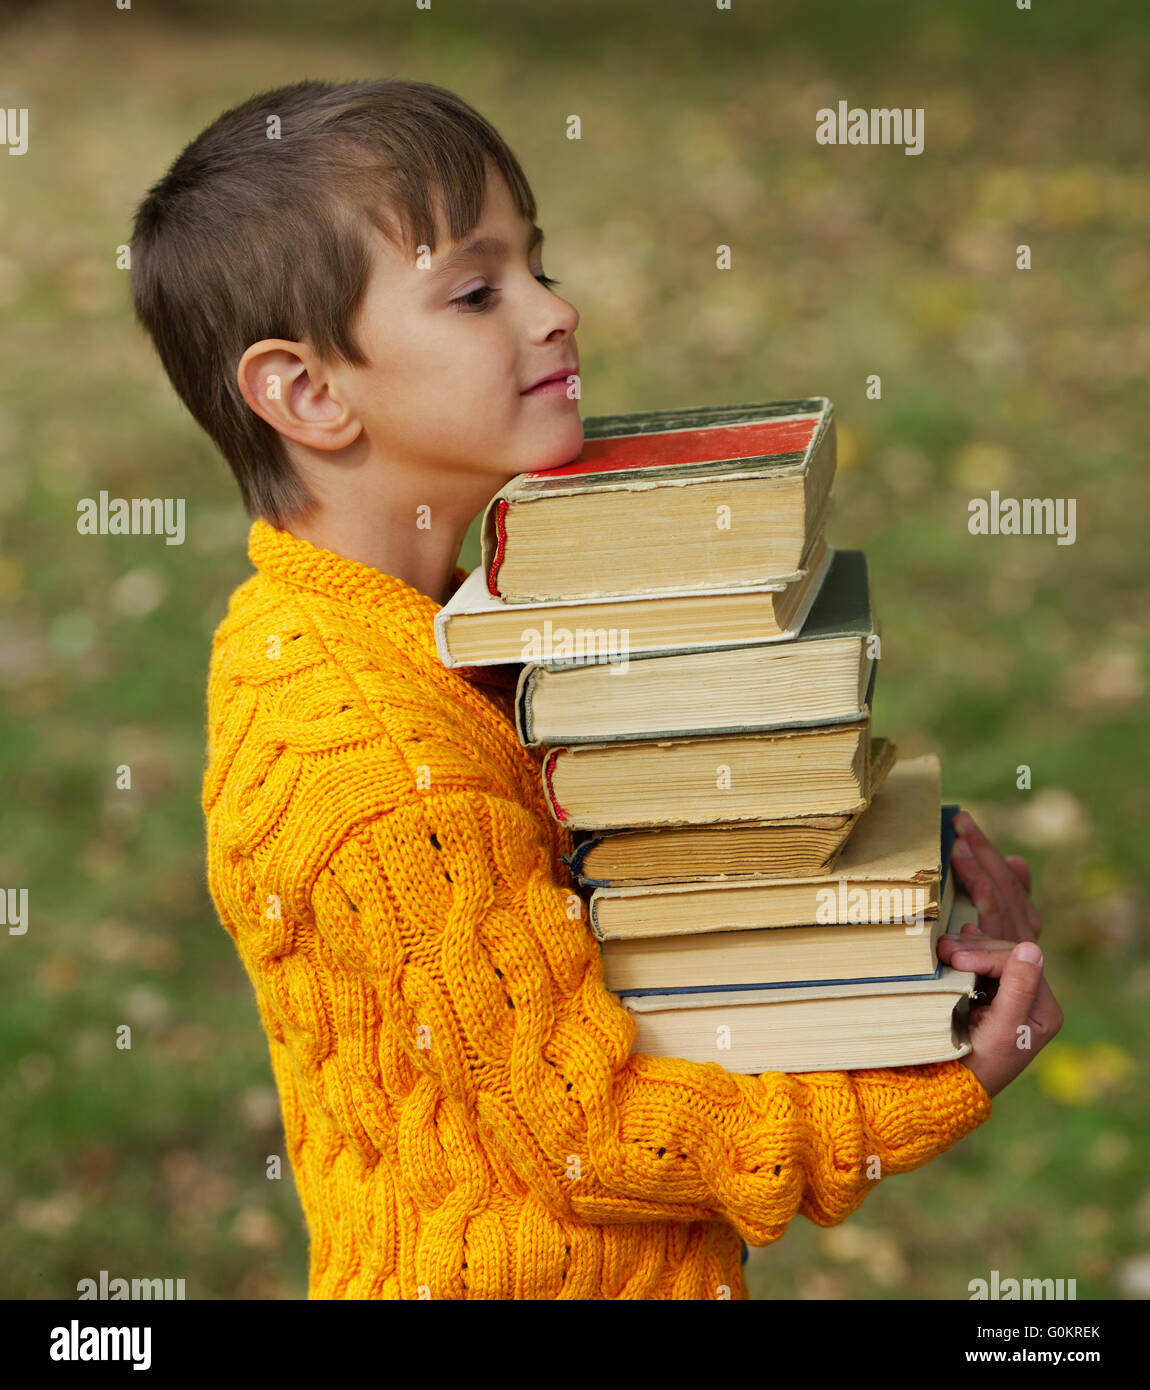 little happy boy carrying stack of books Stock Photo